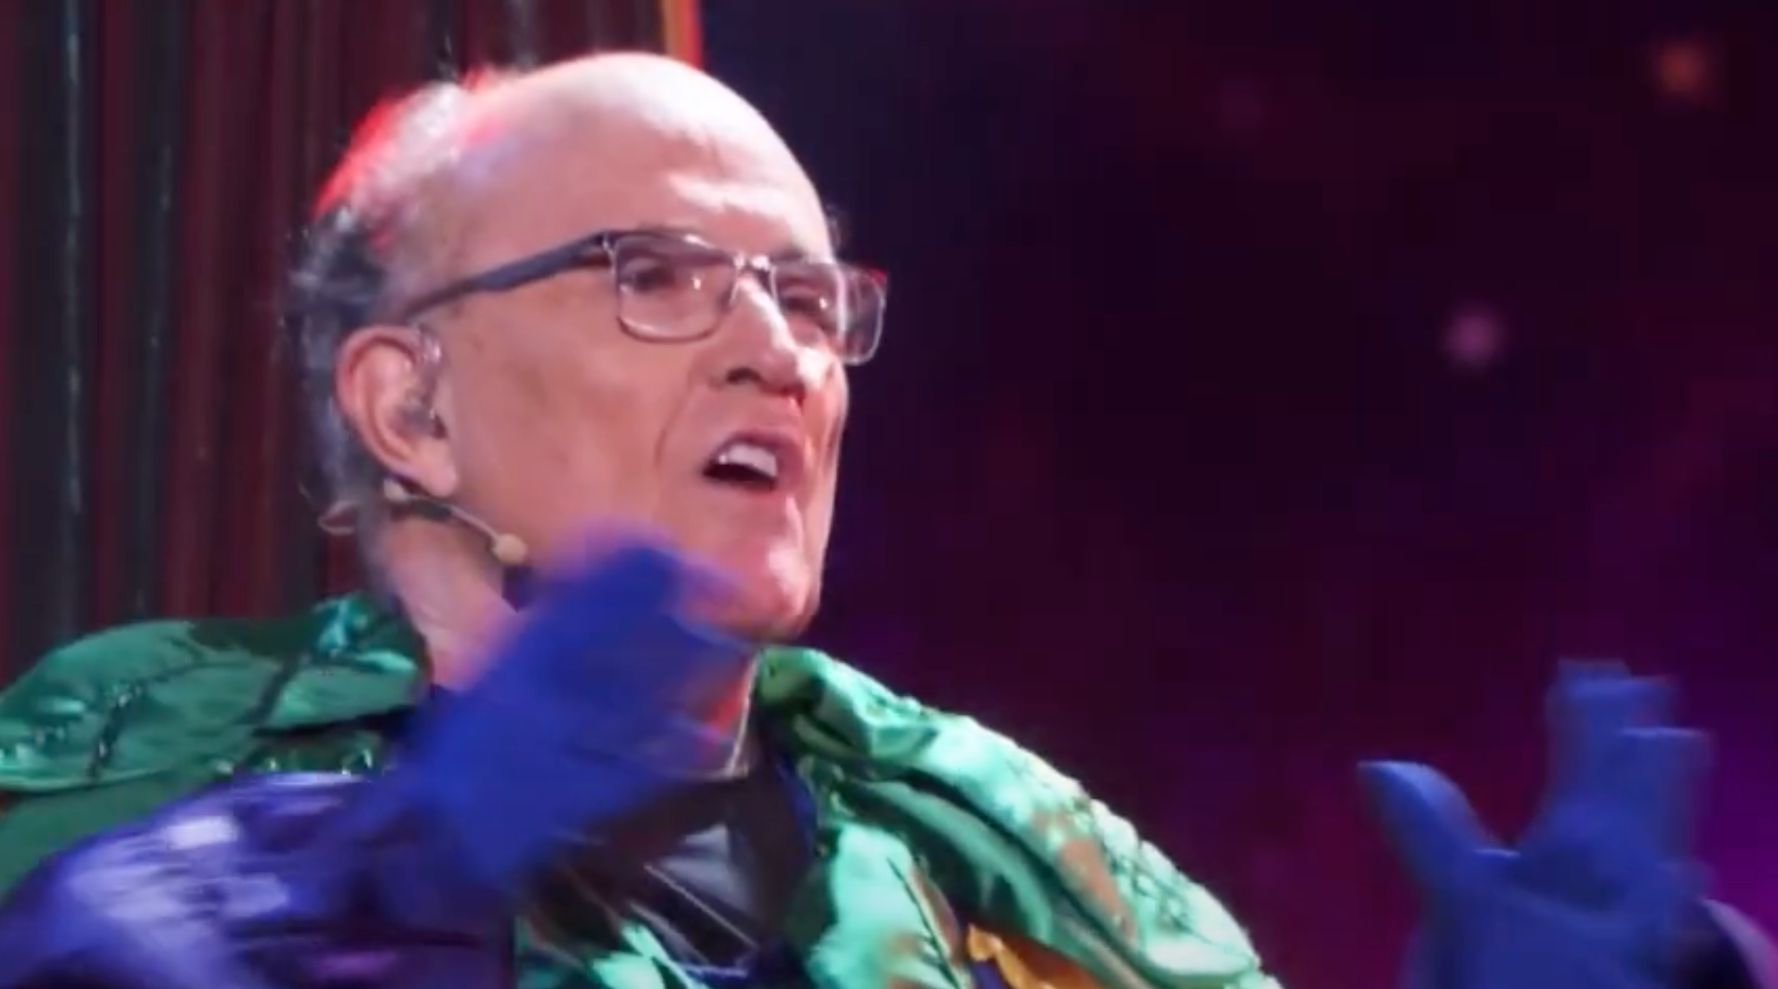 Rudy Giuliani Unveiled On 'The Masked Singer'; Judge Ken Jeong Walks Off: 'I'm Done'